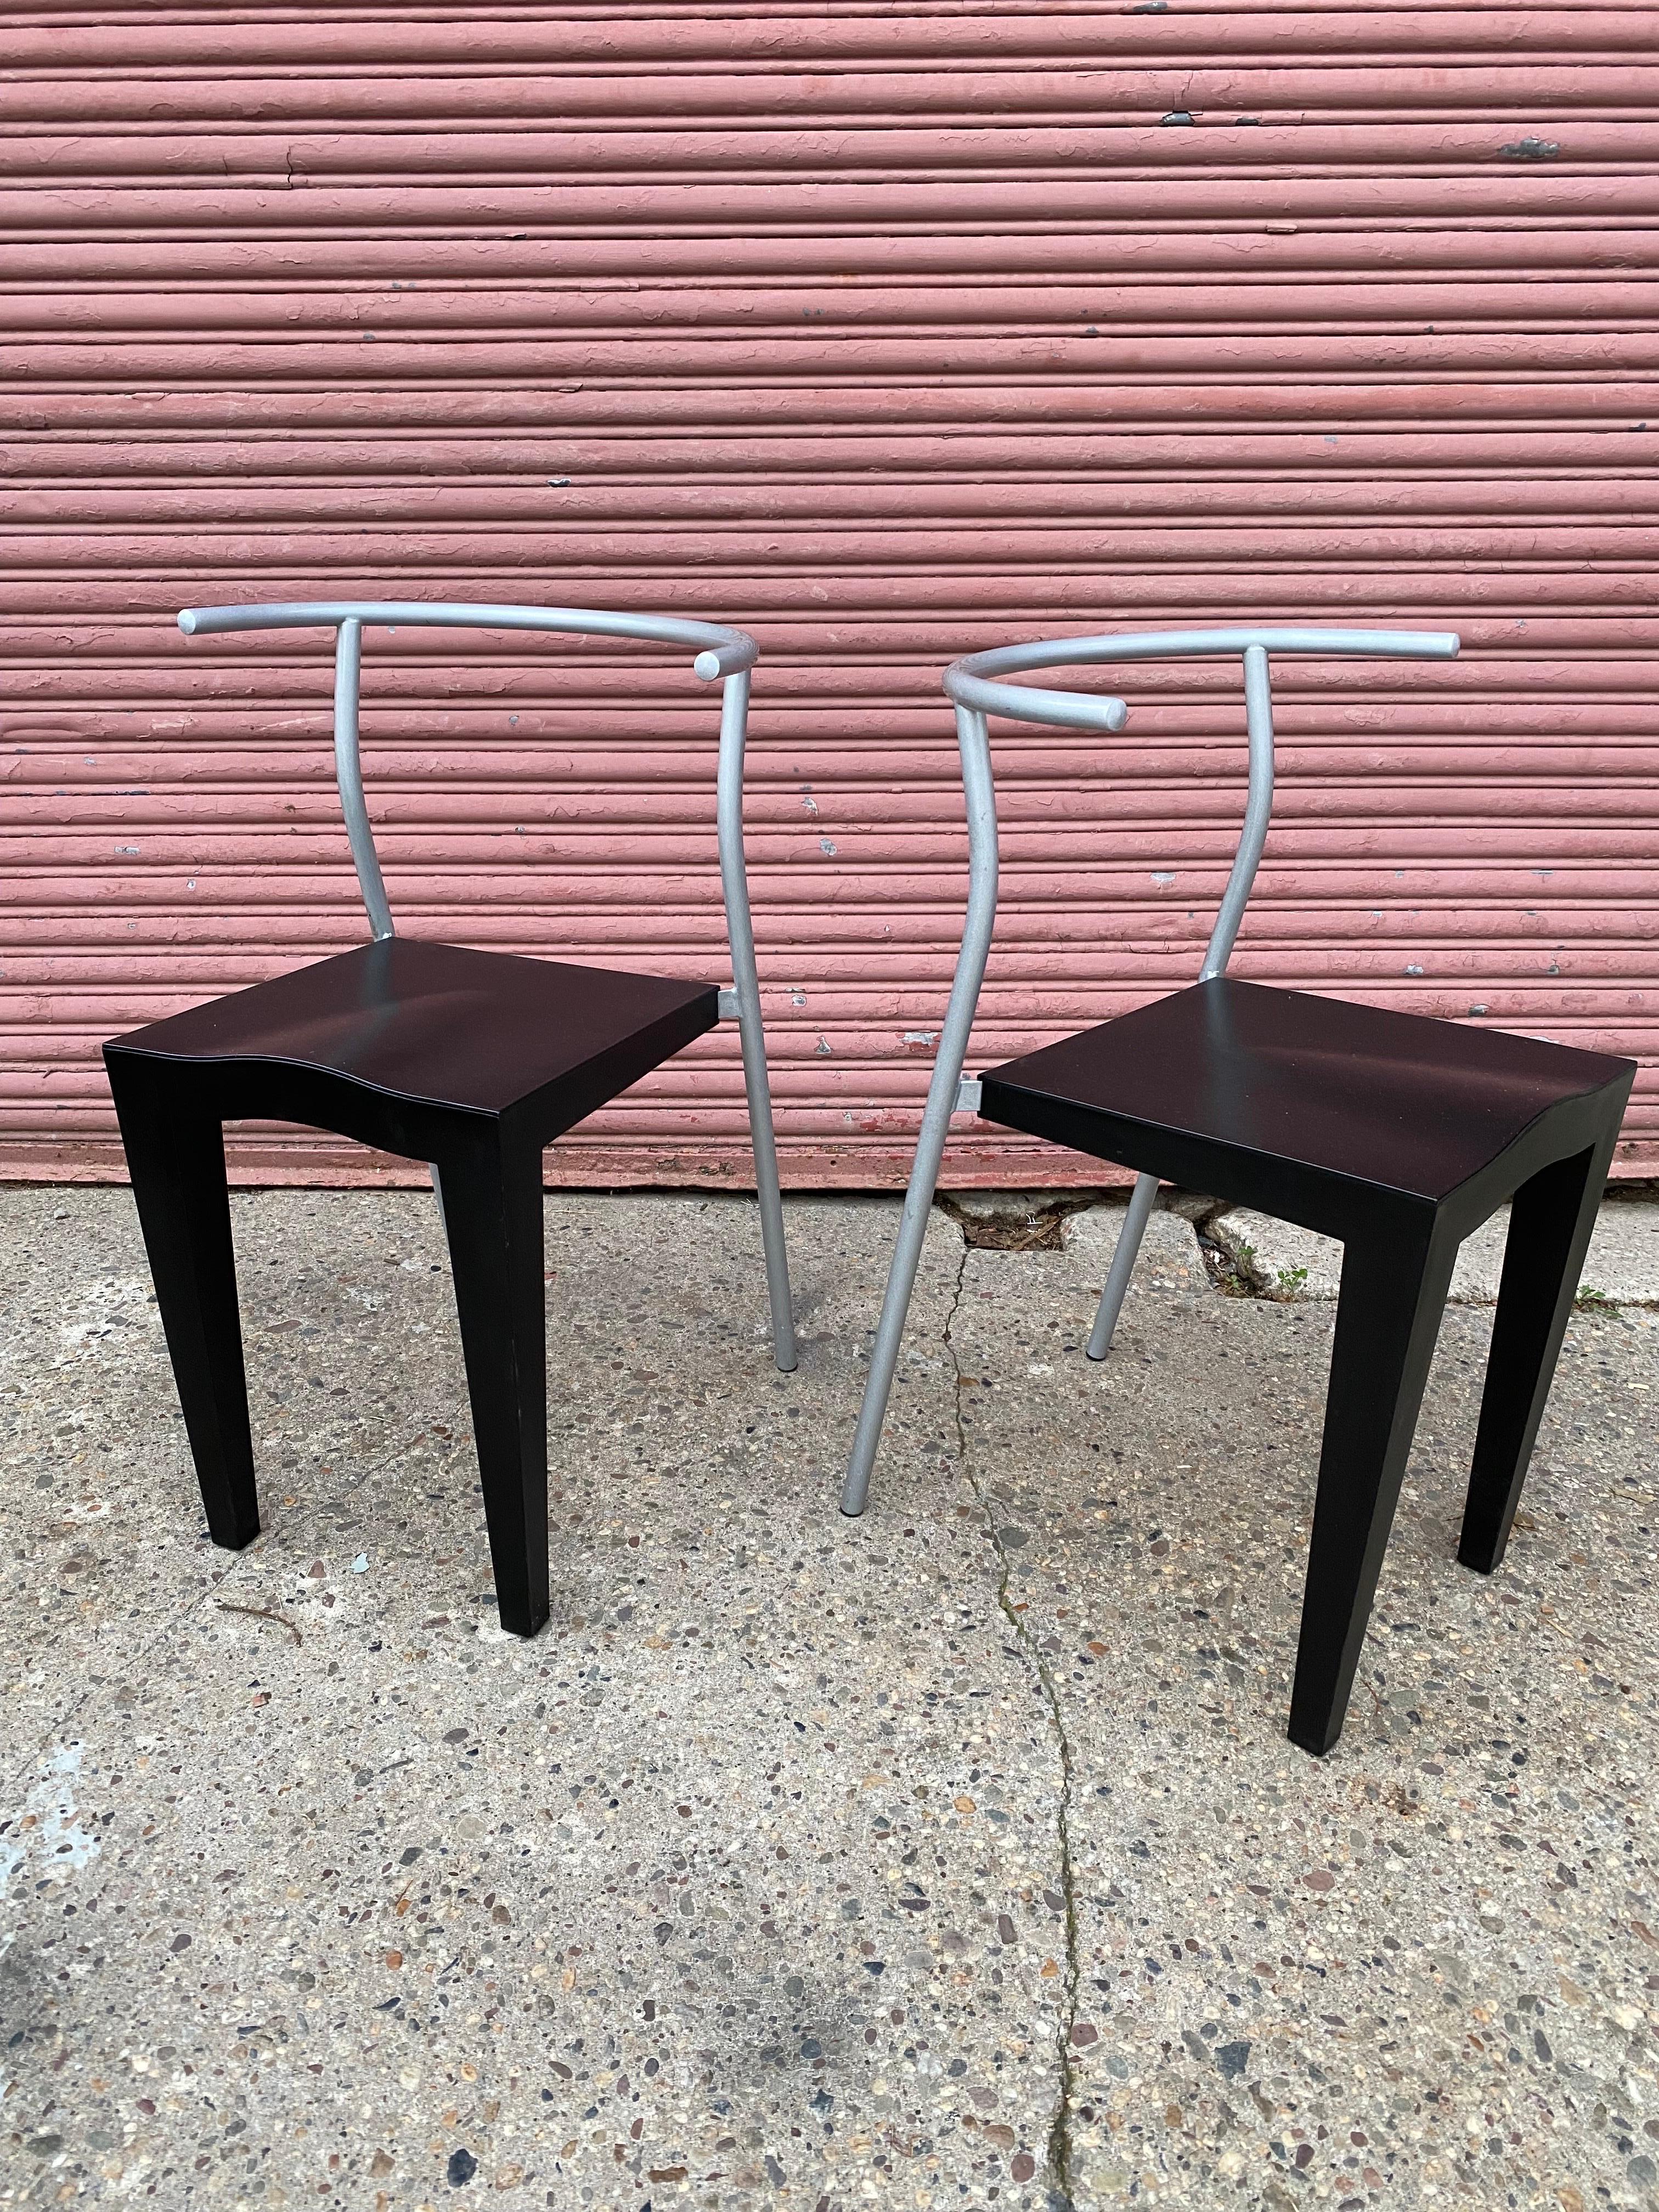 Pair of Dr. Glob chairs designed by Philippe Starck for Kartell. Chairs are black with metal silver backs. Designed in the 1990's. In nice Original Condition!.